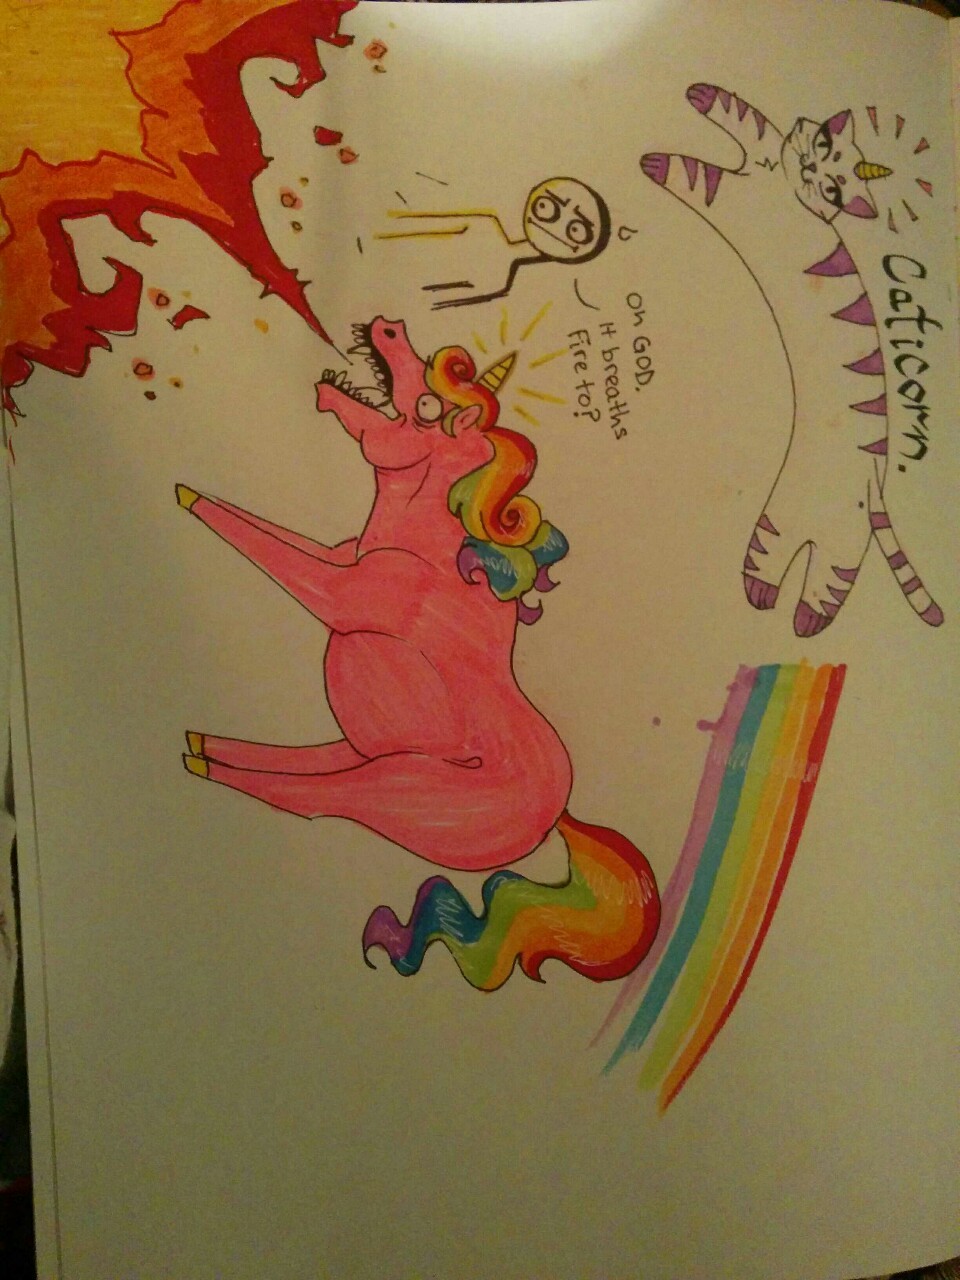 A friend an artist here on Tumblr asked for ideas for doodles. I requested a melting rainbow, a cat-icorn (made that up on the spot) and a unicorn that breathes fire. I reblogged a few of them, here is one where the Ziveraa put all three together....